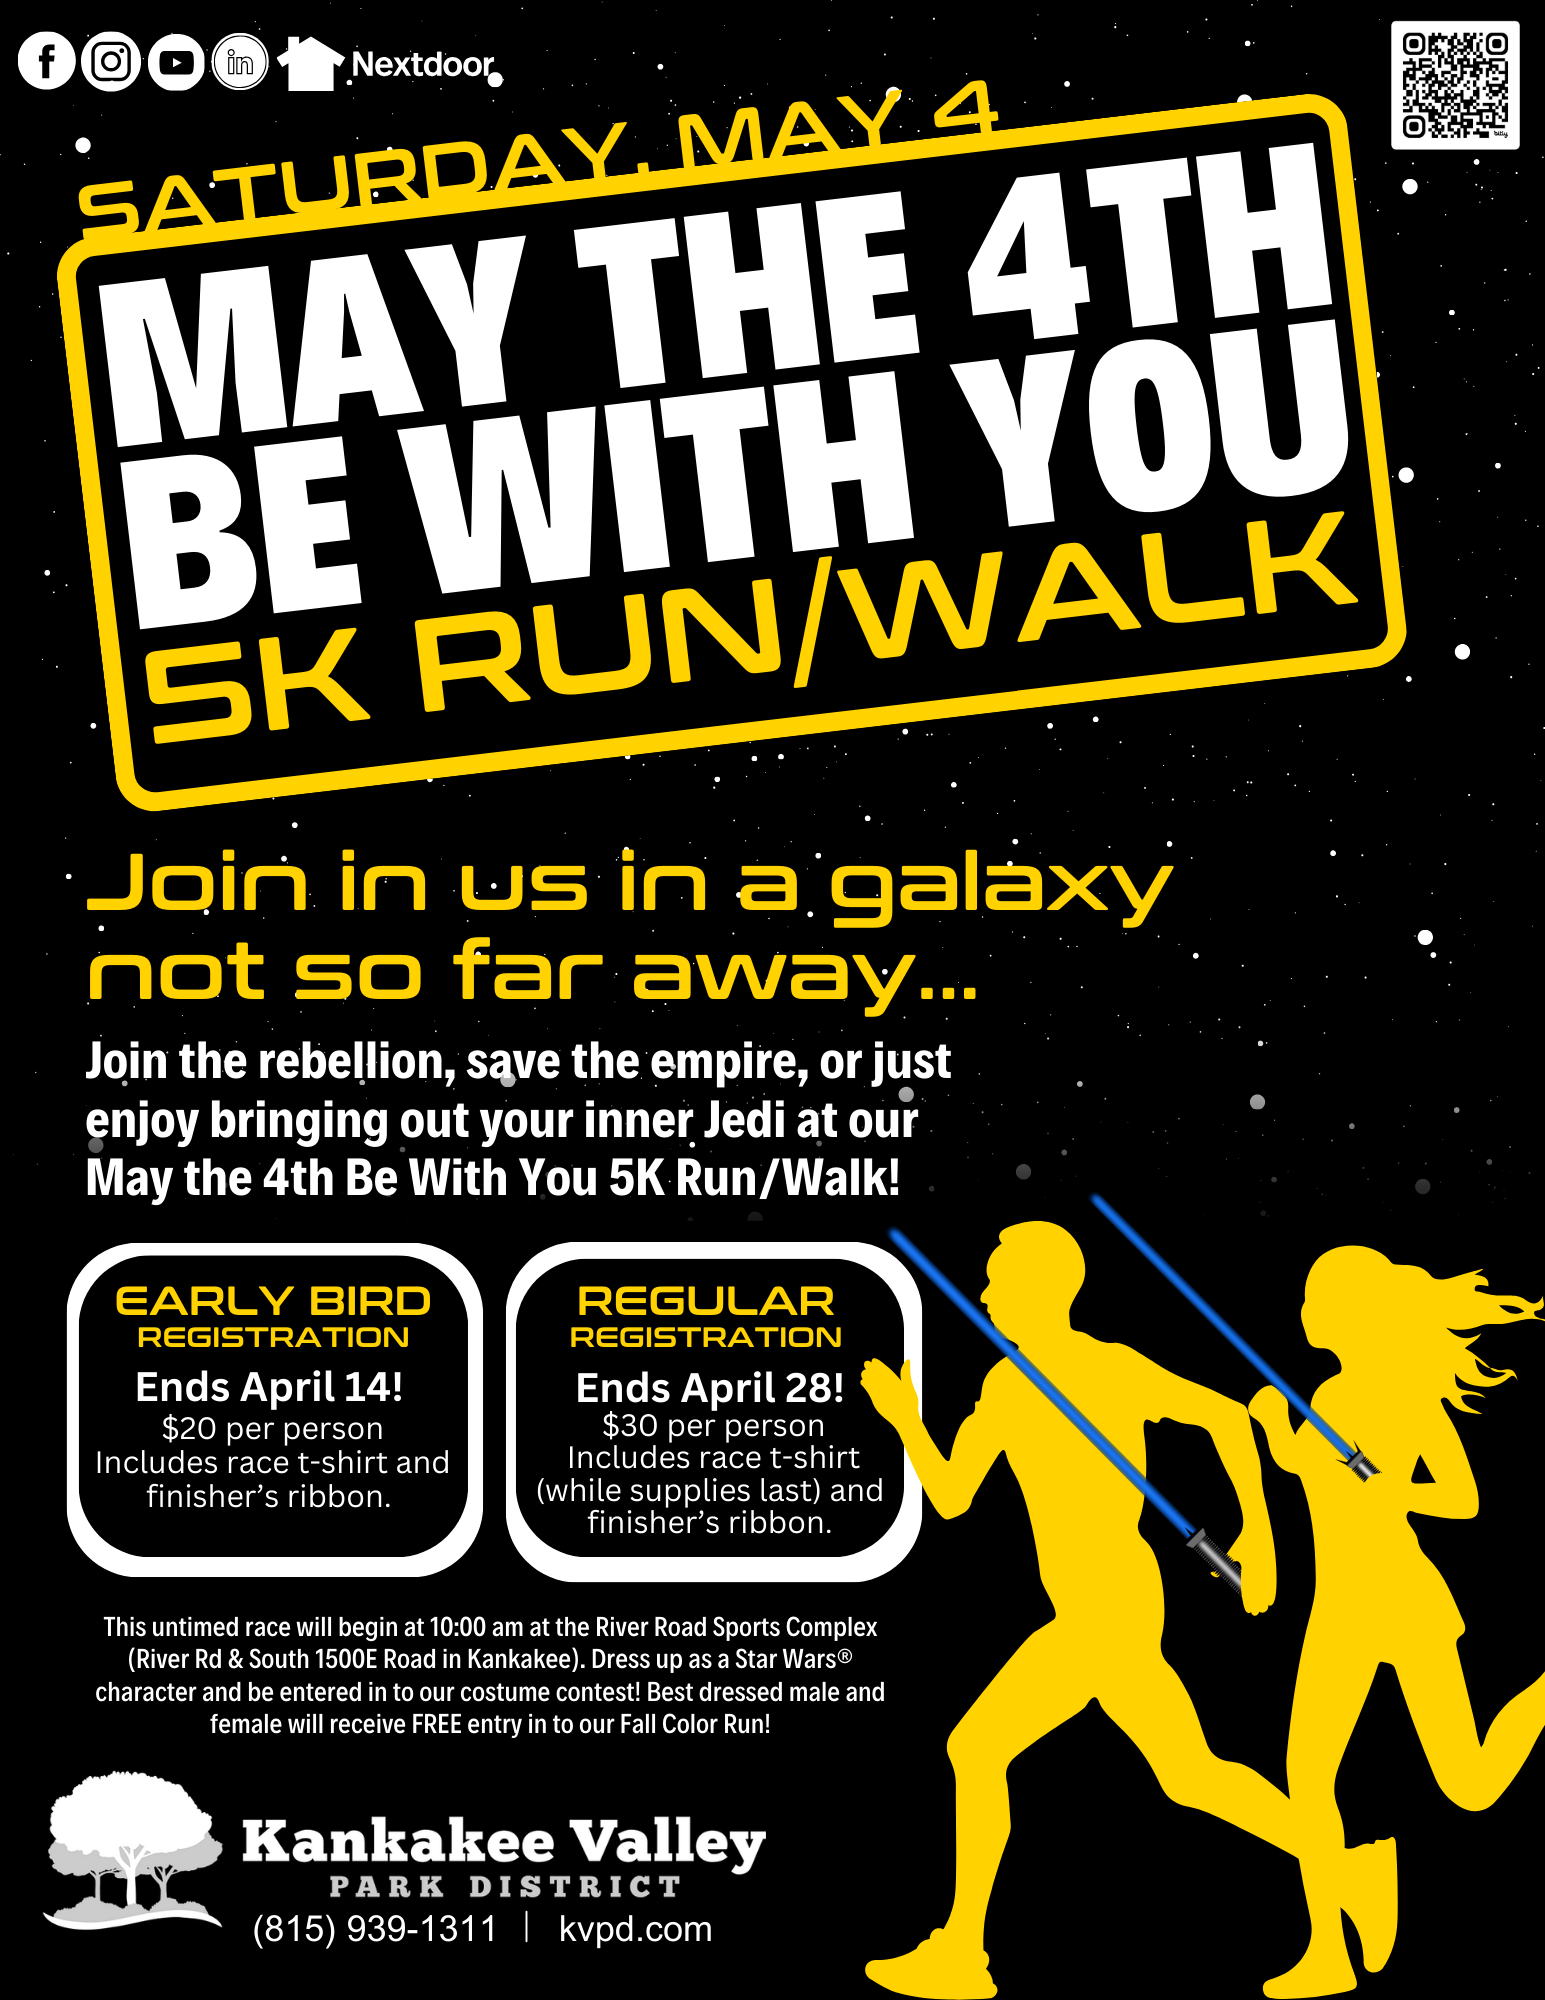 May the 4th Be With You 5K Run/Walk